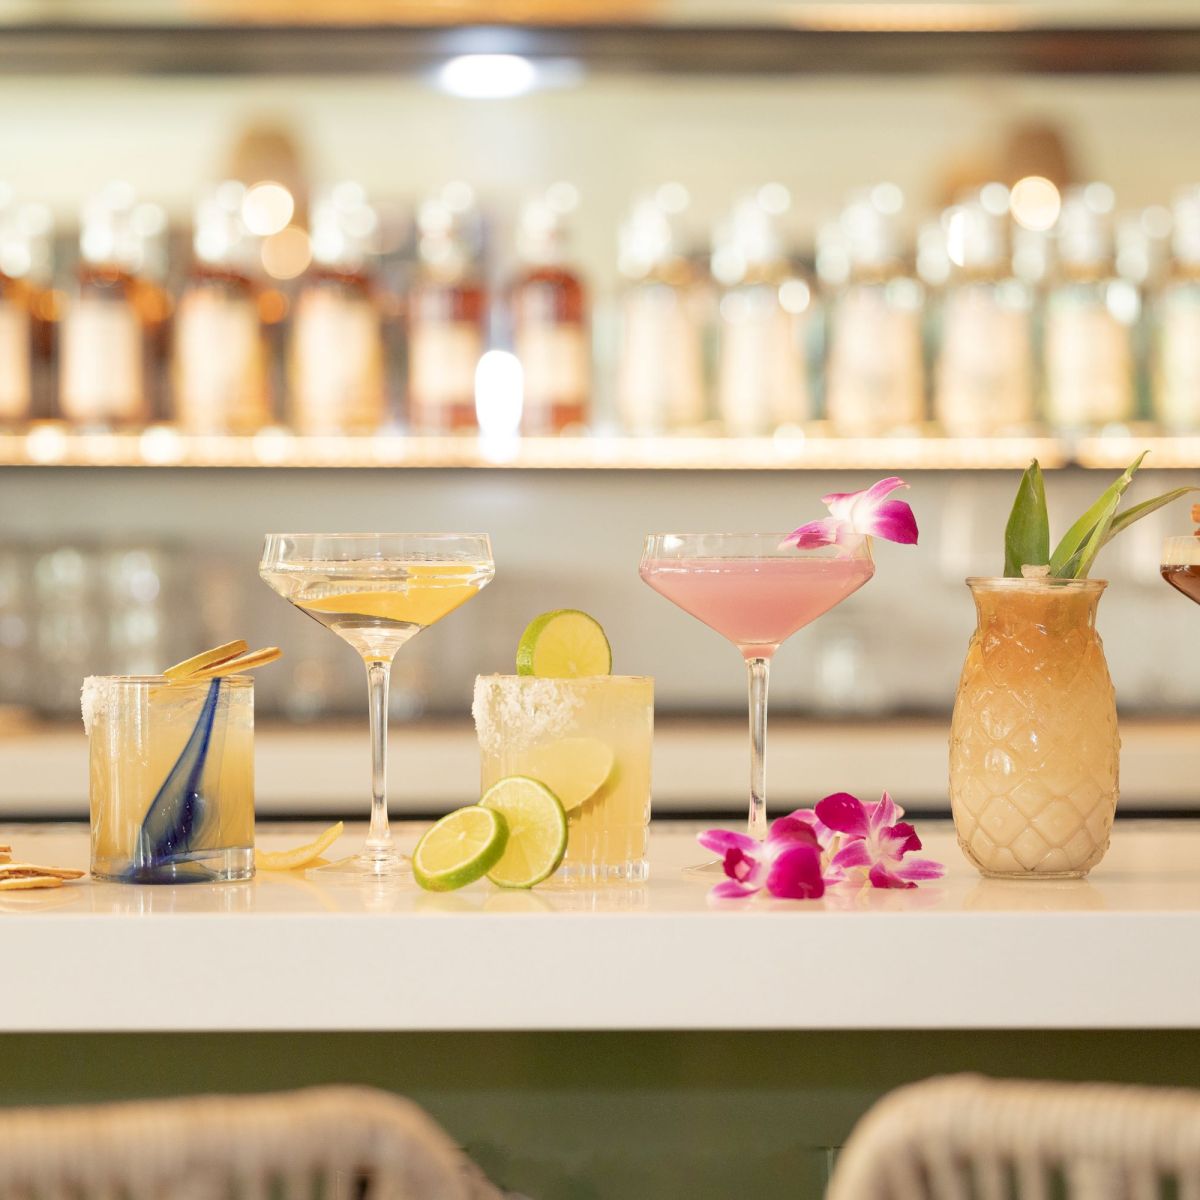 An assortment of cocktails on a bar counter, with garnishes like lime slices, flowers, and a bottle in the background.